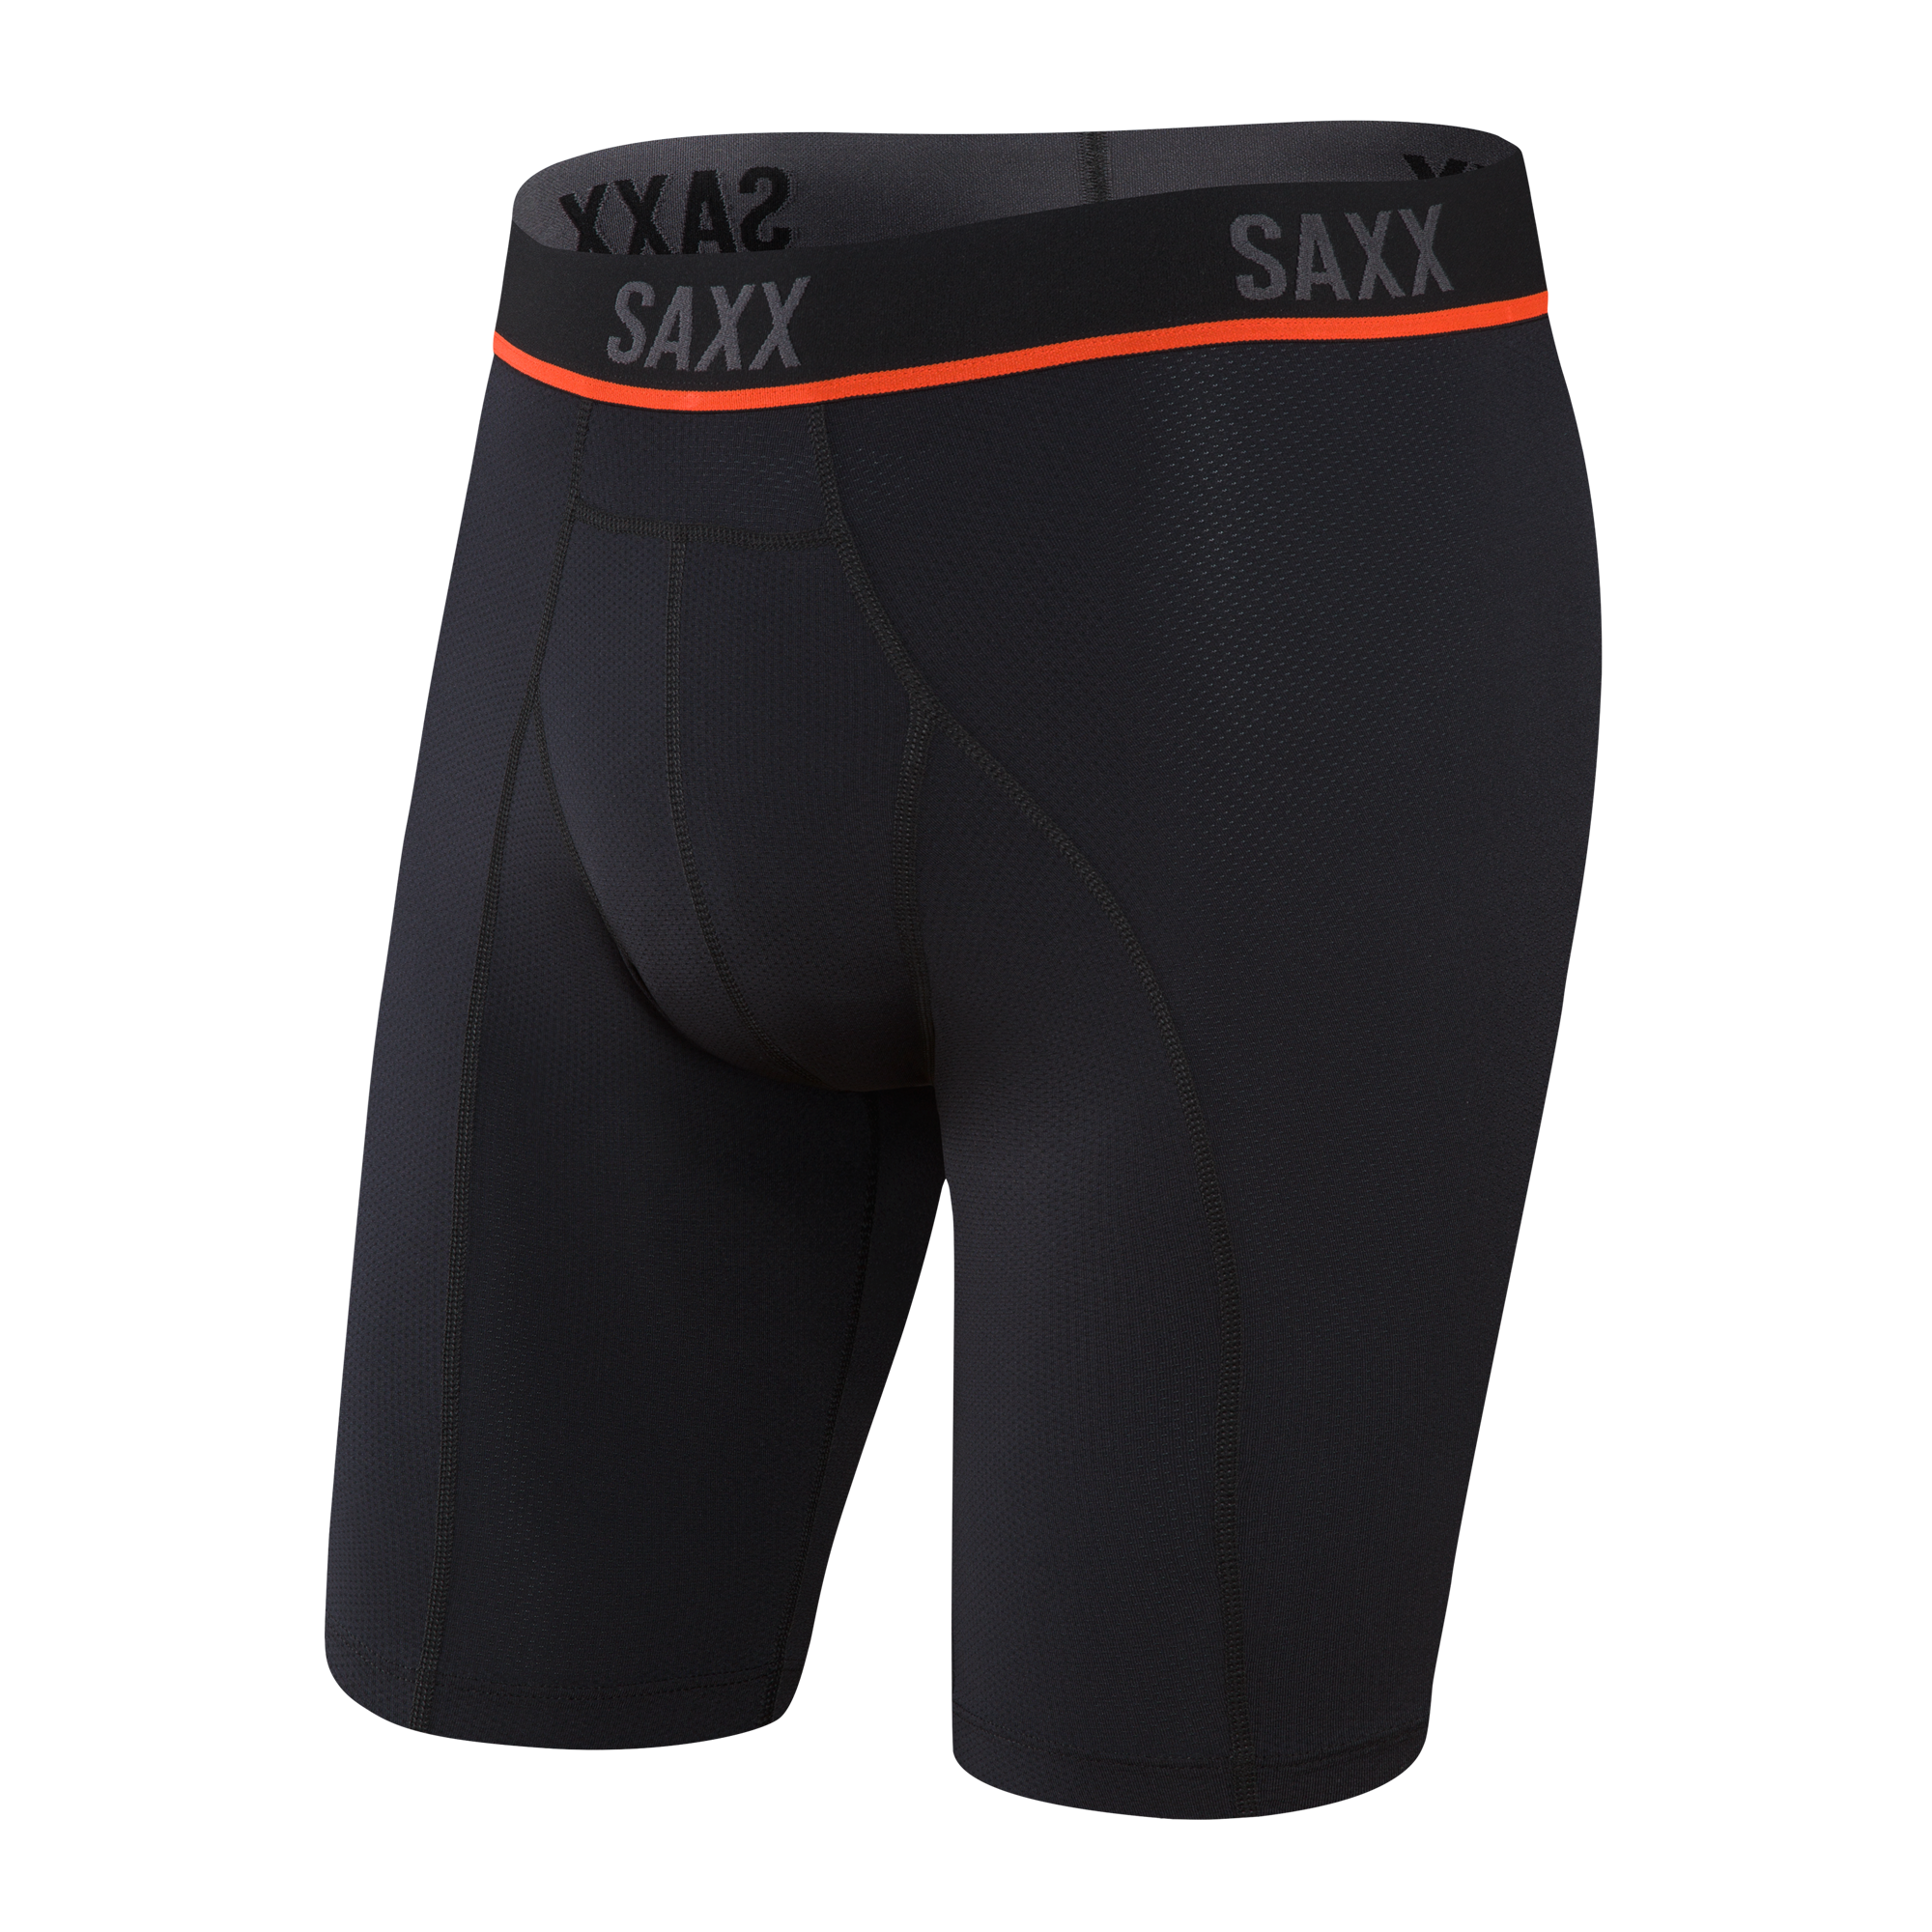 SAXX Kinectic HD Boxer Brief SXBB32-OCB – My Top Drawer